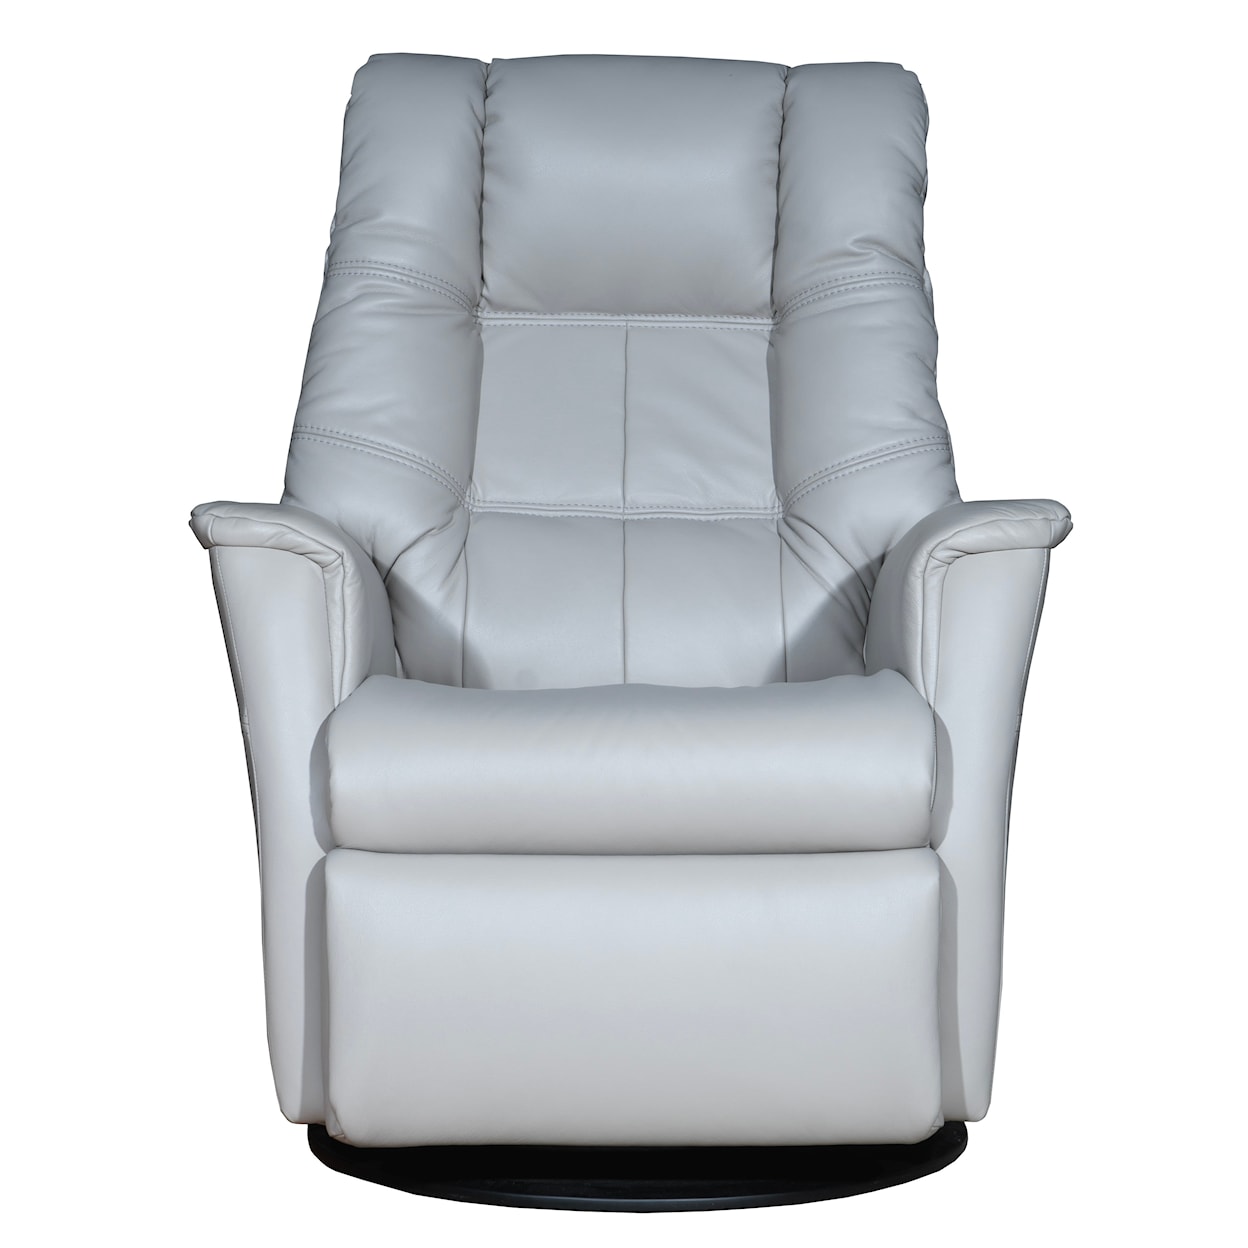 Norwegian Designs 21901 Standard Power Recliner with Chaise